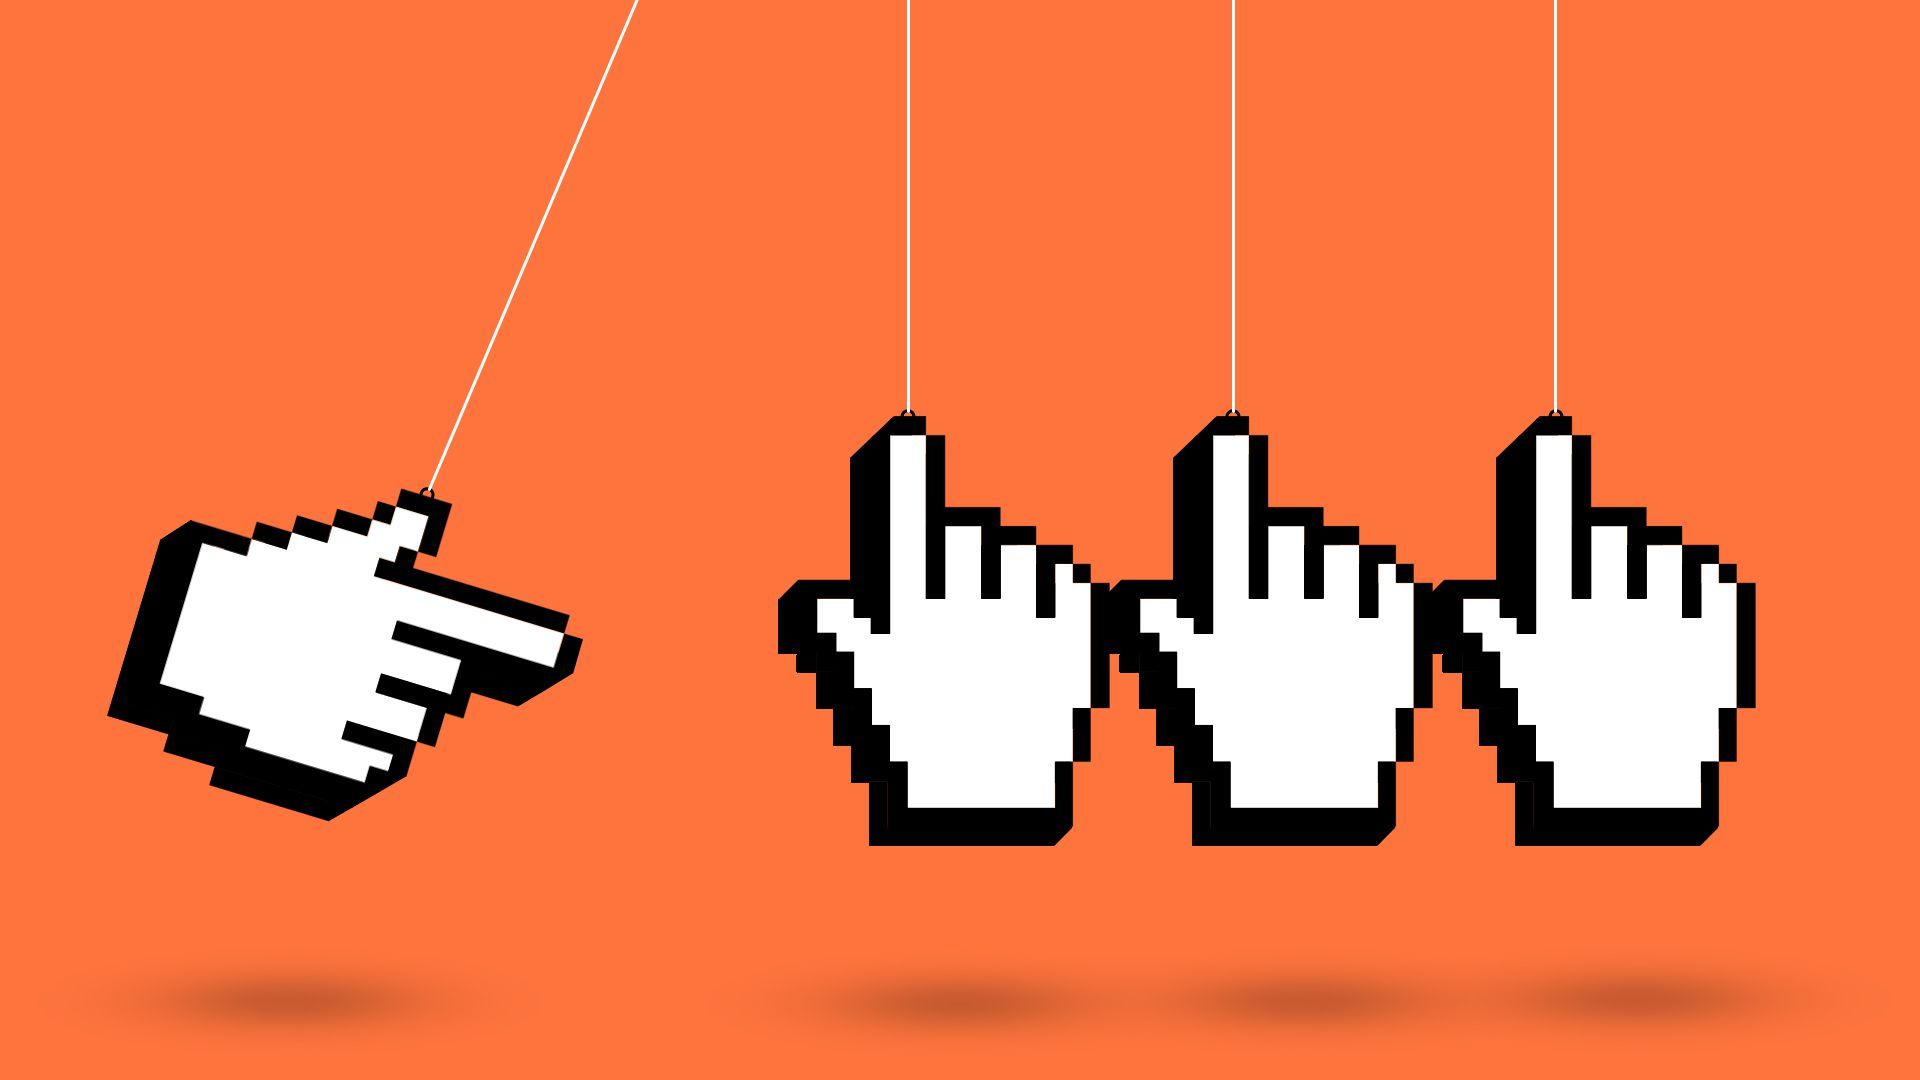 Illustration of a Newton's cradle of hanging cursor hands with one swinging toward the rest